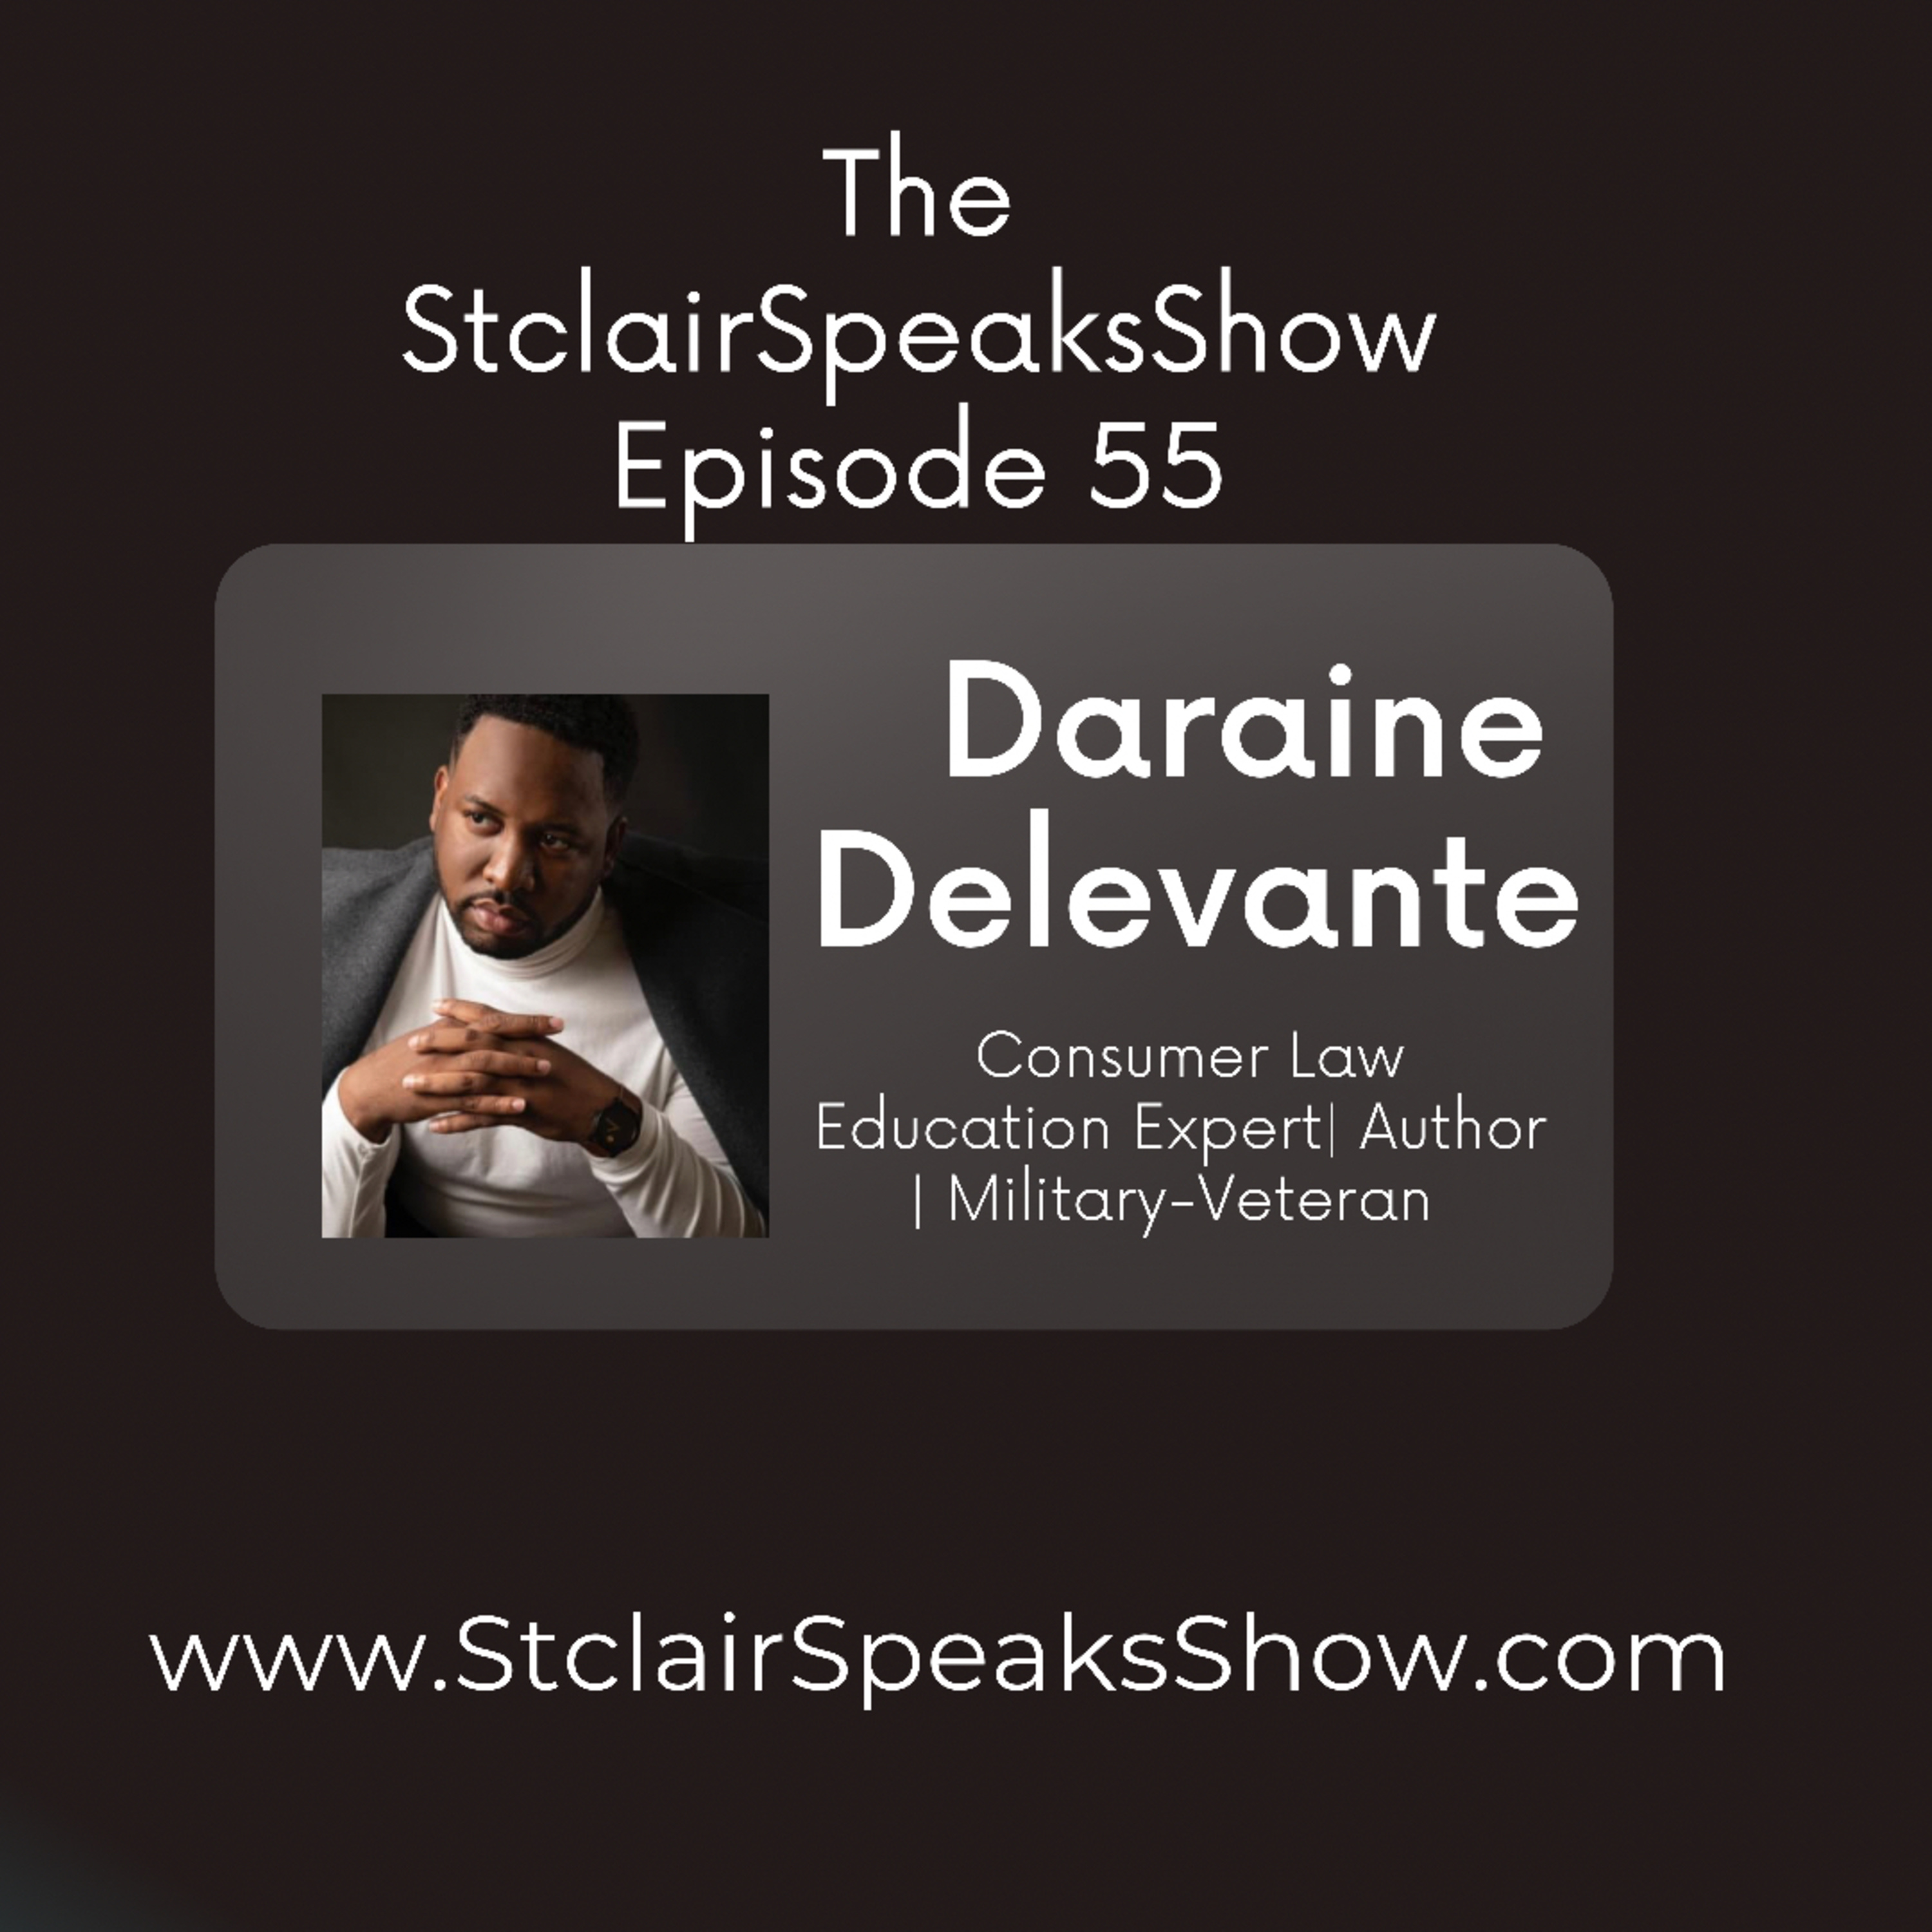 The StclairSpeaksShow featuring Daraine Delevante Consumer Law Education Expert| Author | Military-Veteran Image